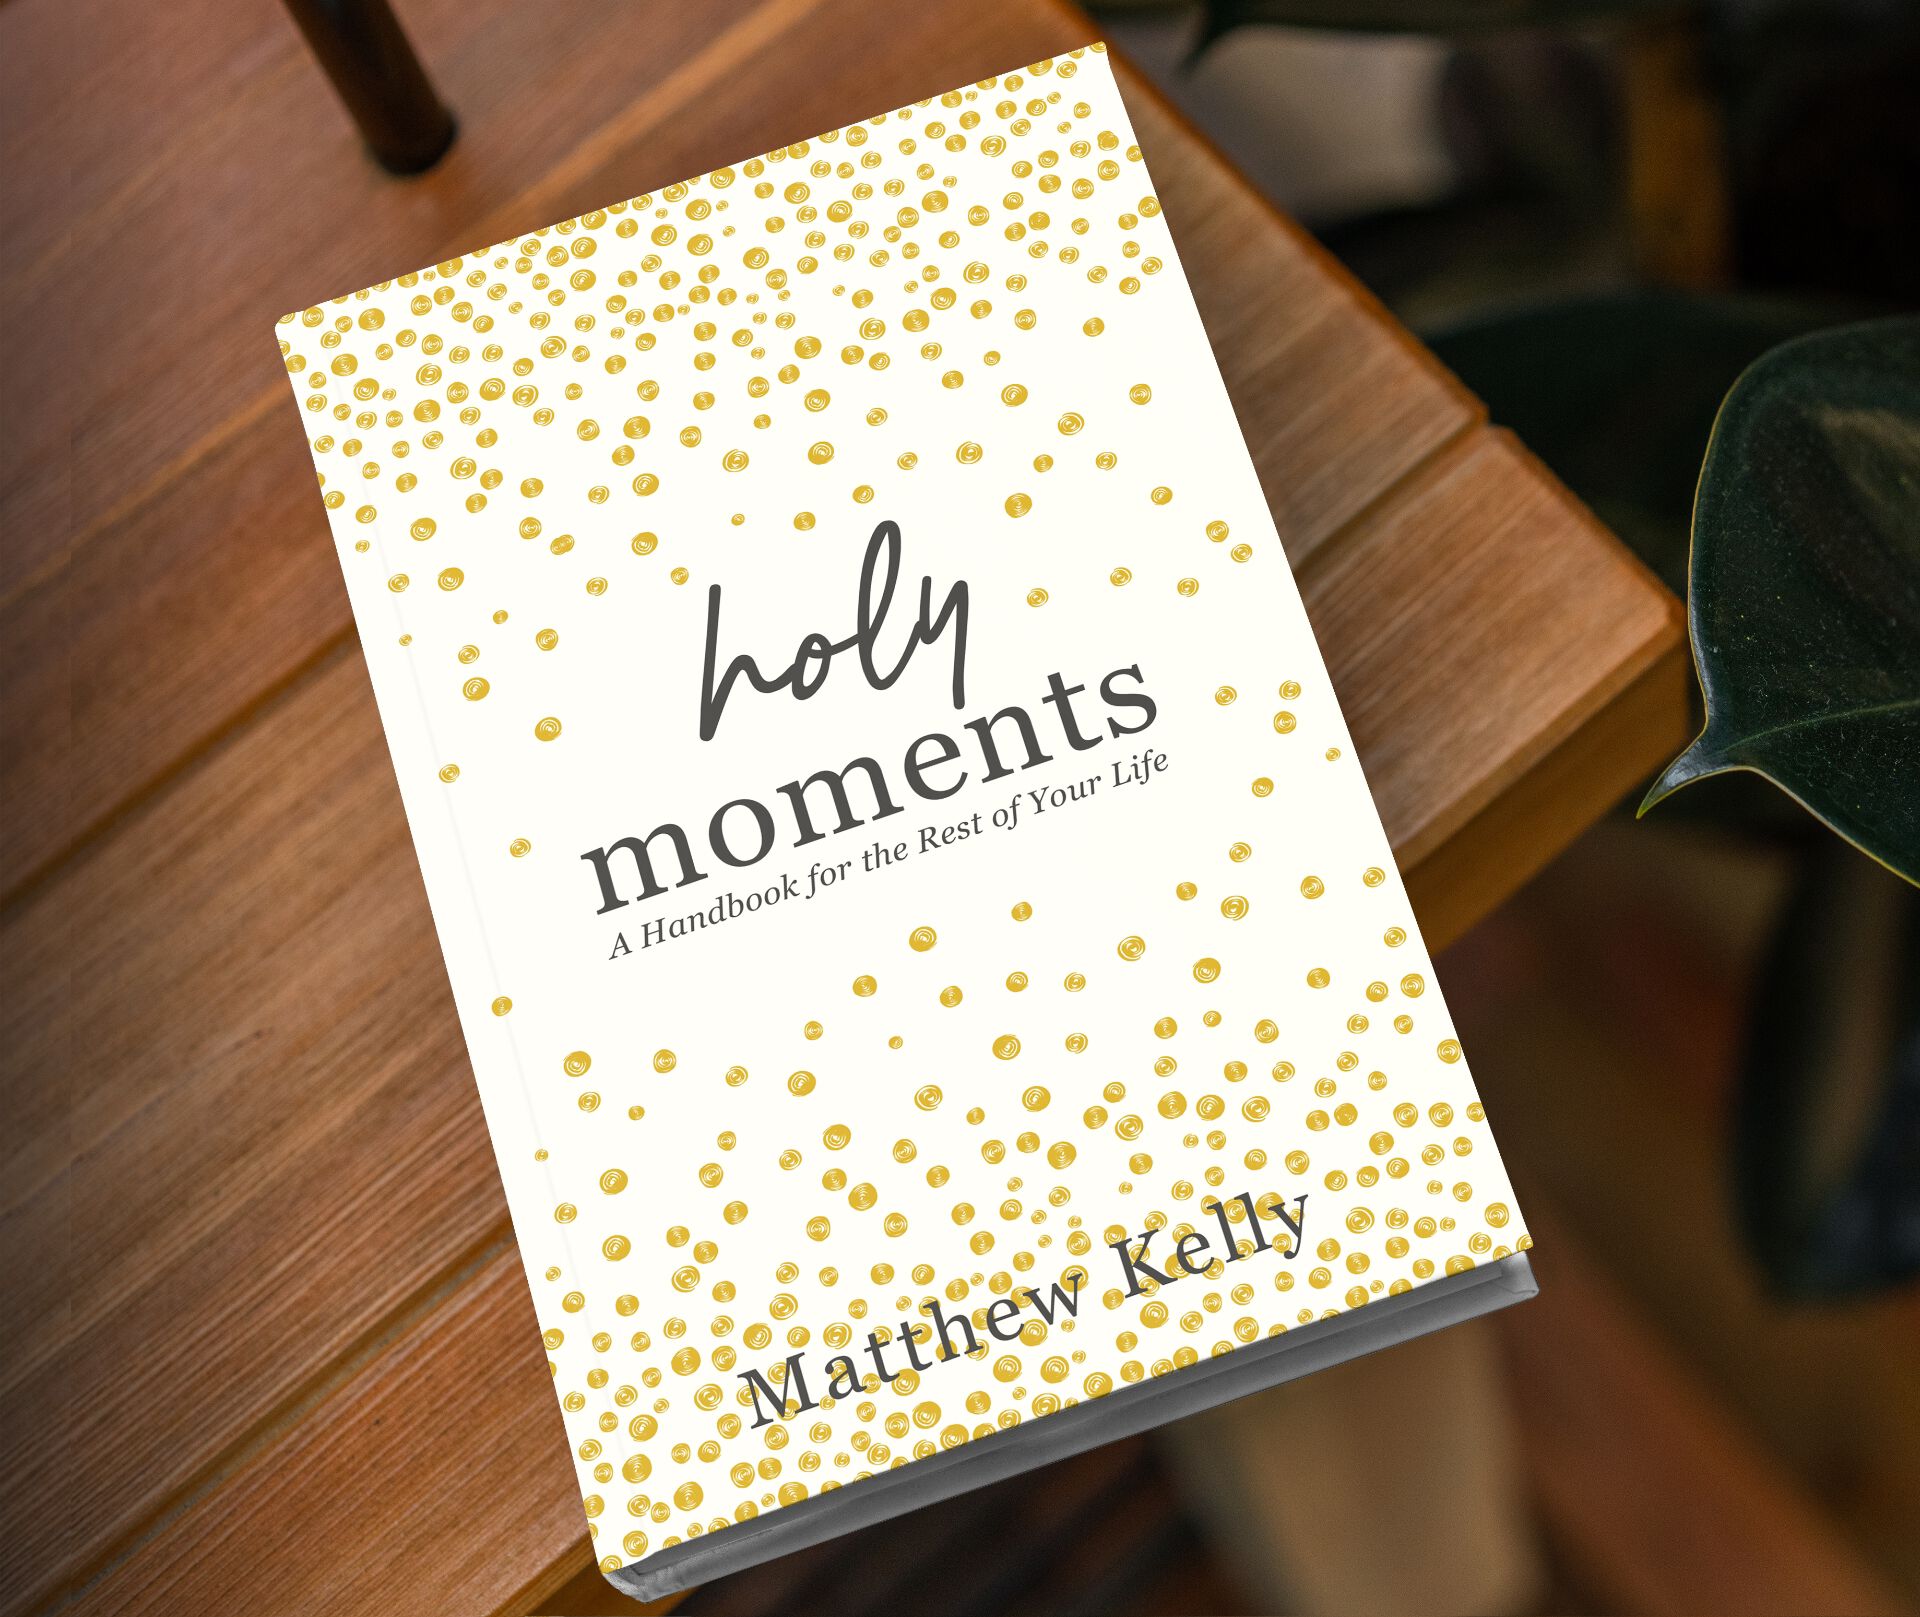 Pre-Order Holy Moments!